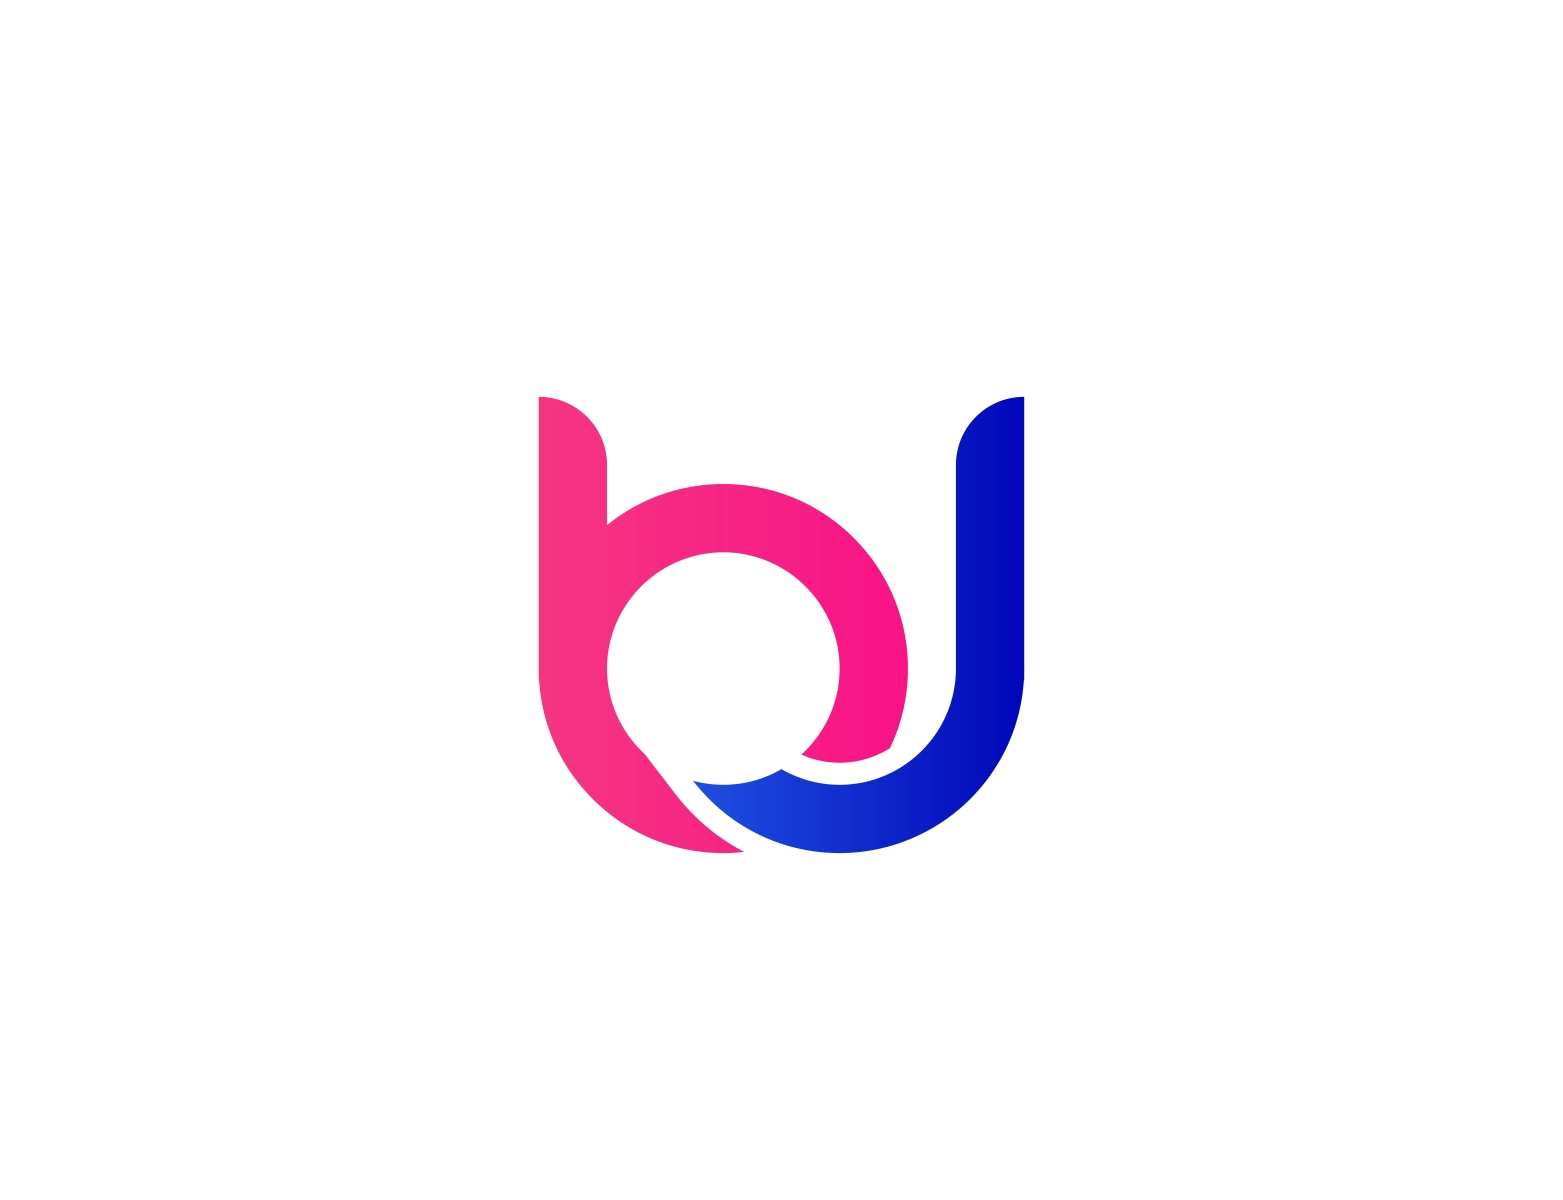 BJ Services logo, Vector Logo of BJ Services brand free download (eps, ai,  png, cdr) formats